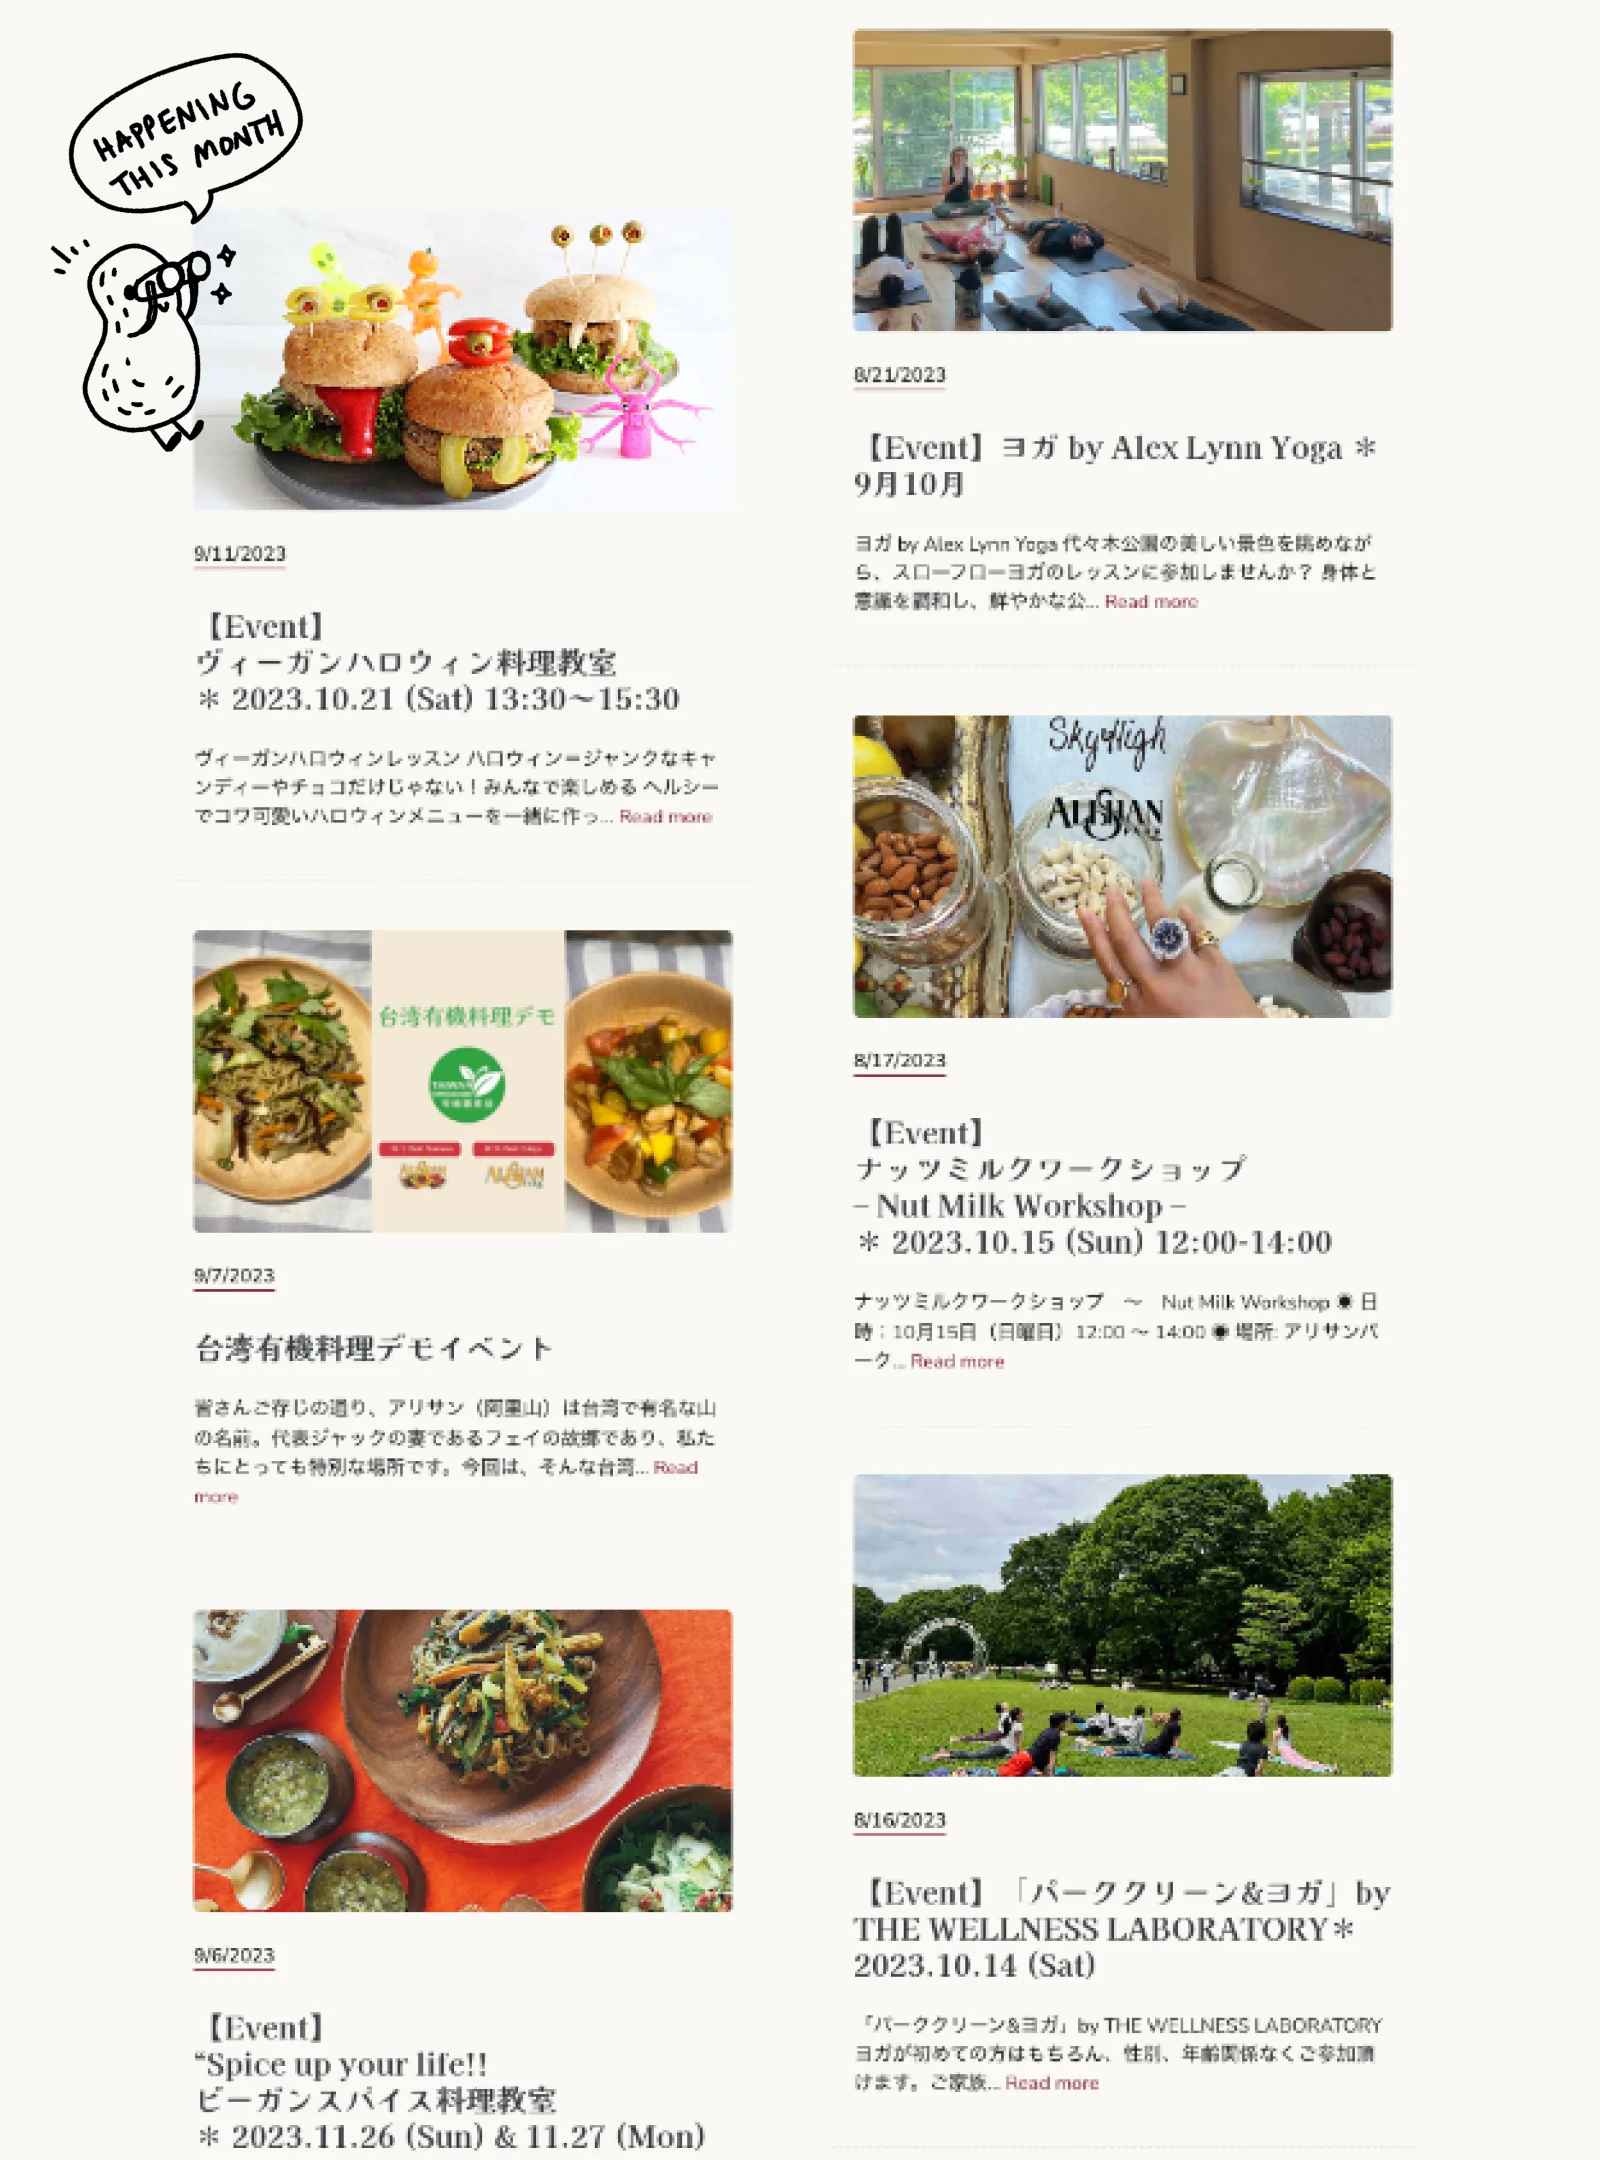 Alishan Park Cafe Tokyo's news and events